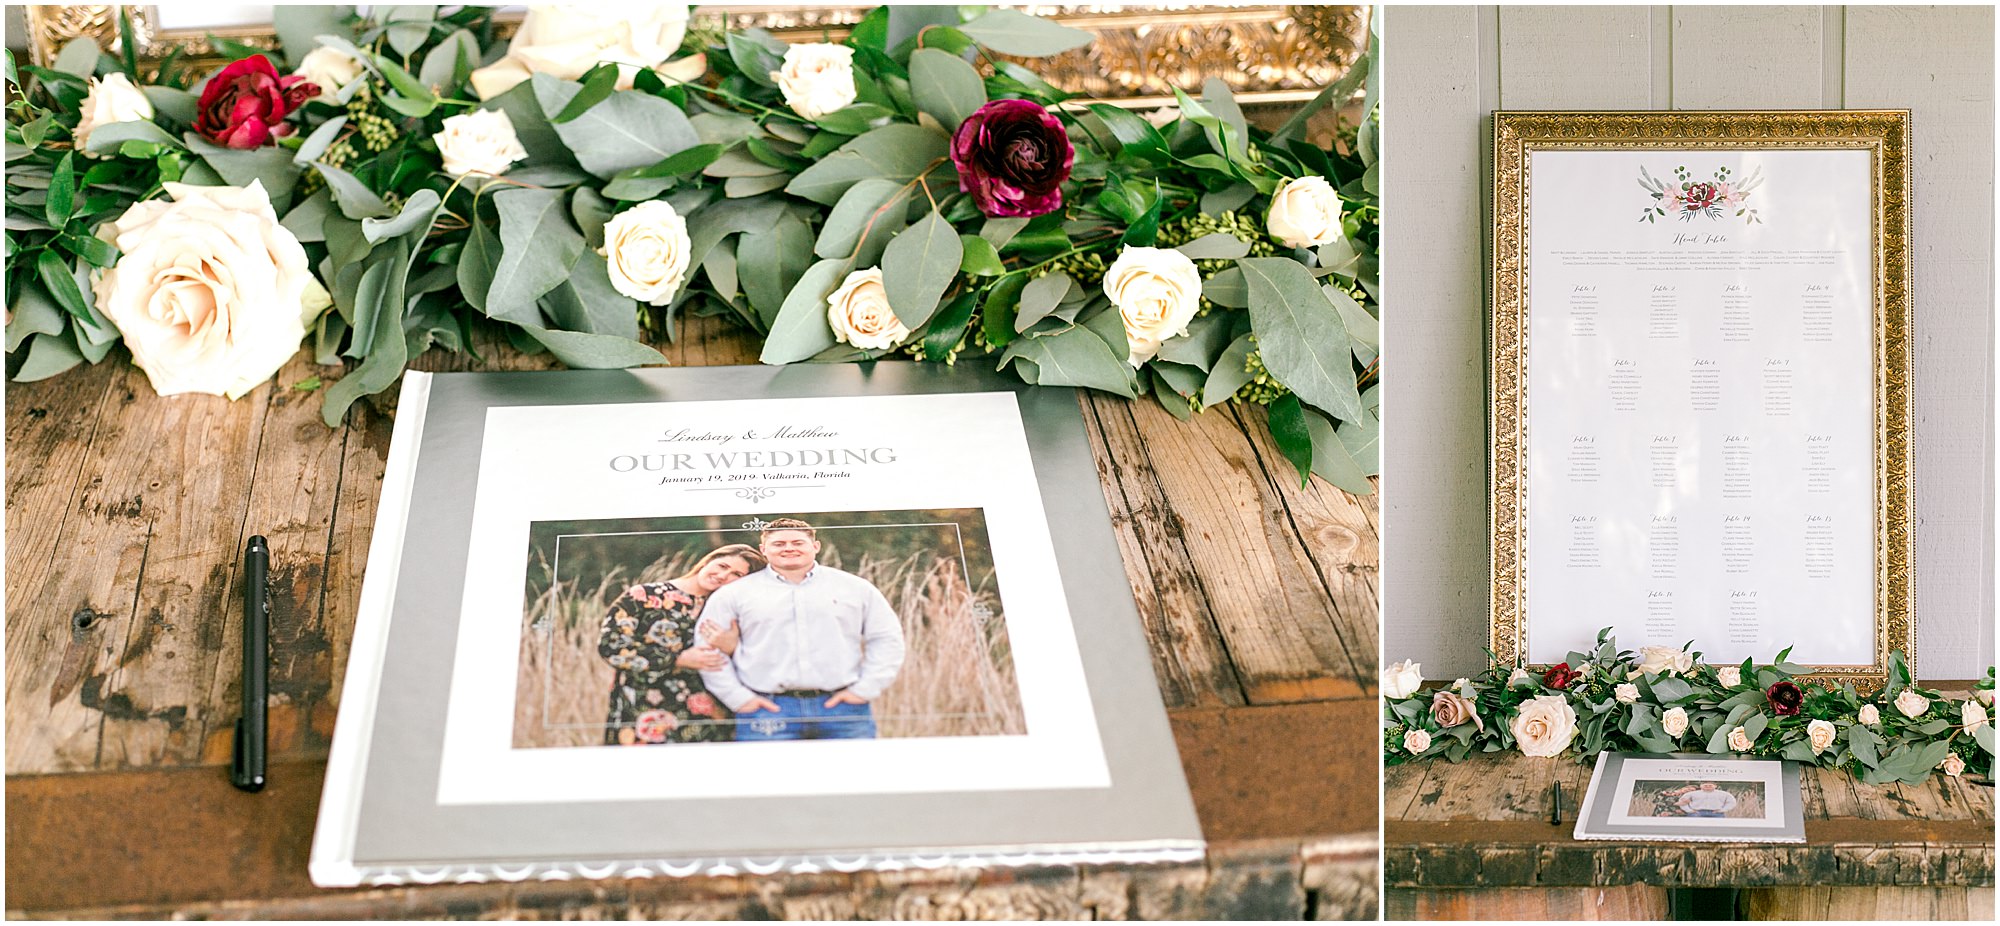 Wedding guest book and large printed seating chart from dusty rose and burgundy wedding